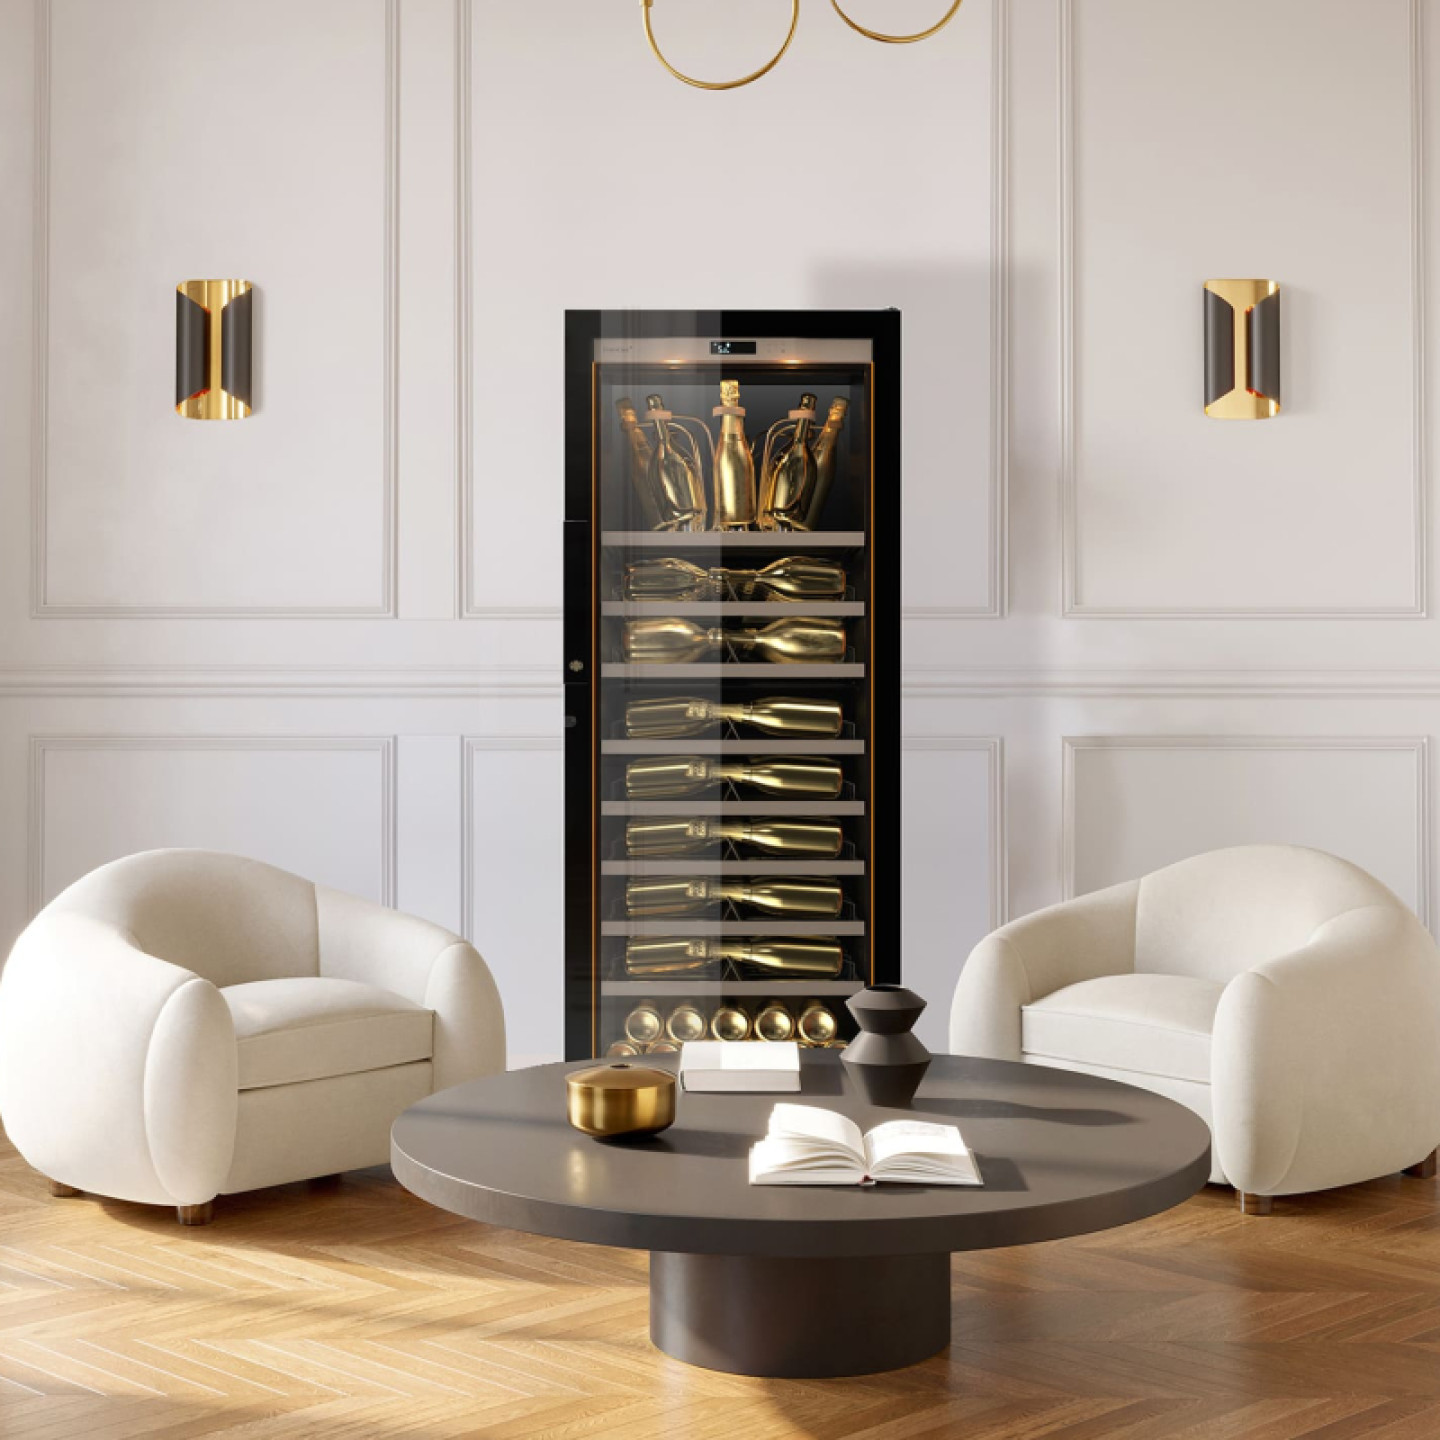 champagne-wine-cooler-luxurious-white-gold-living-room-decoration.jpg